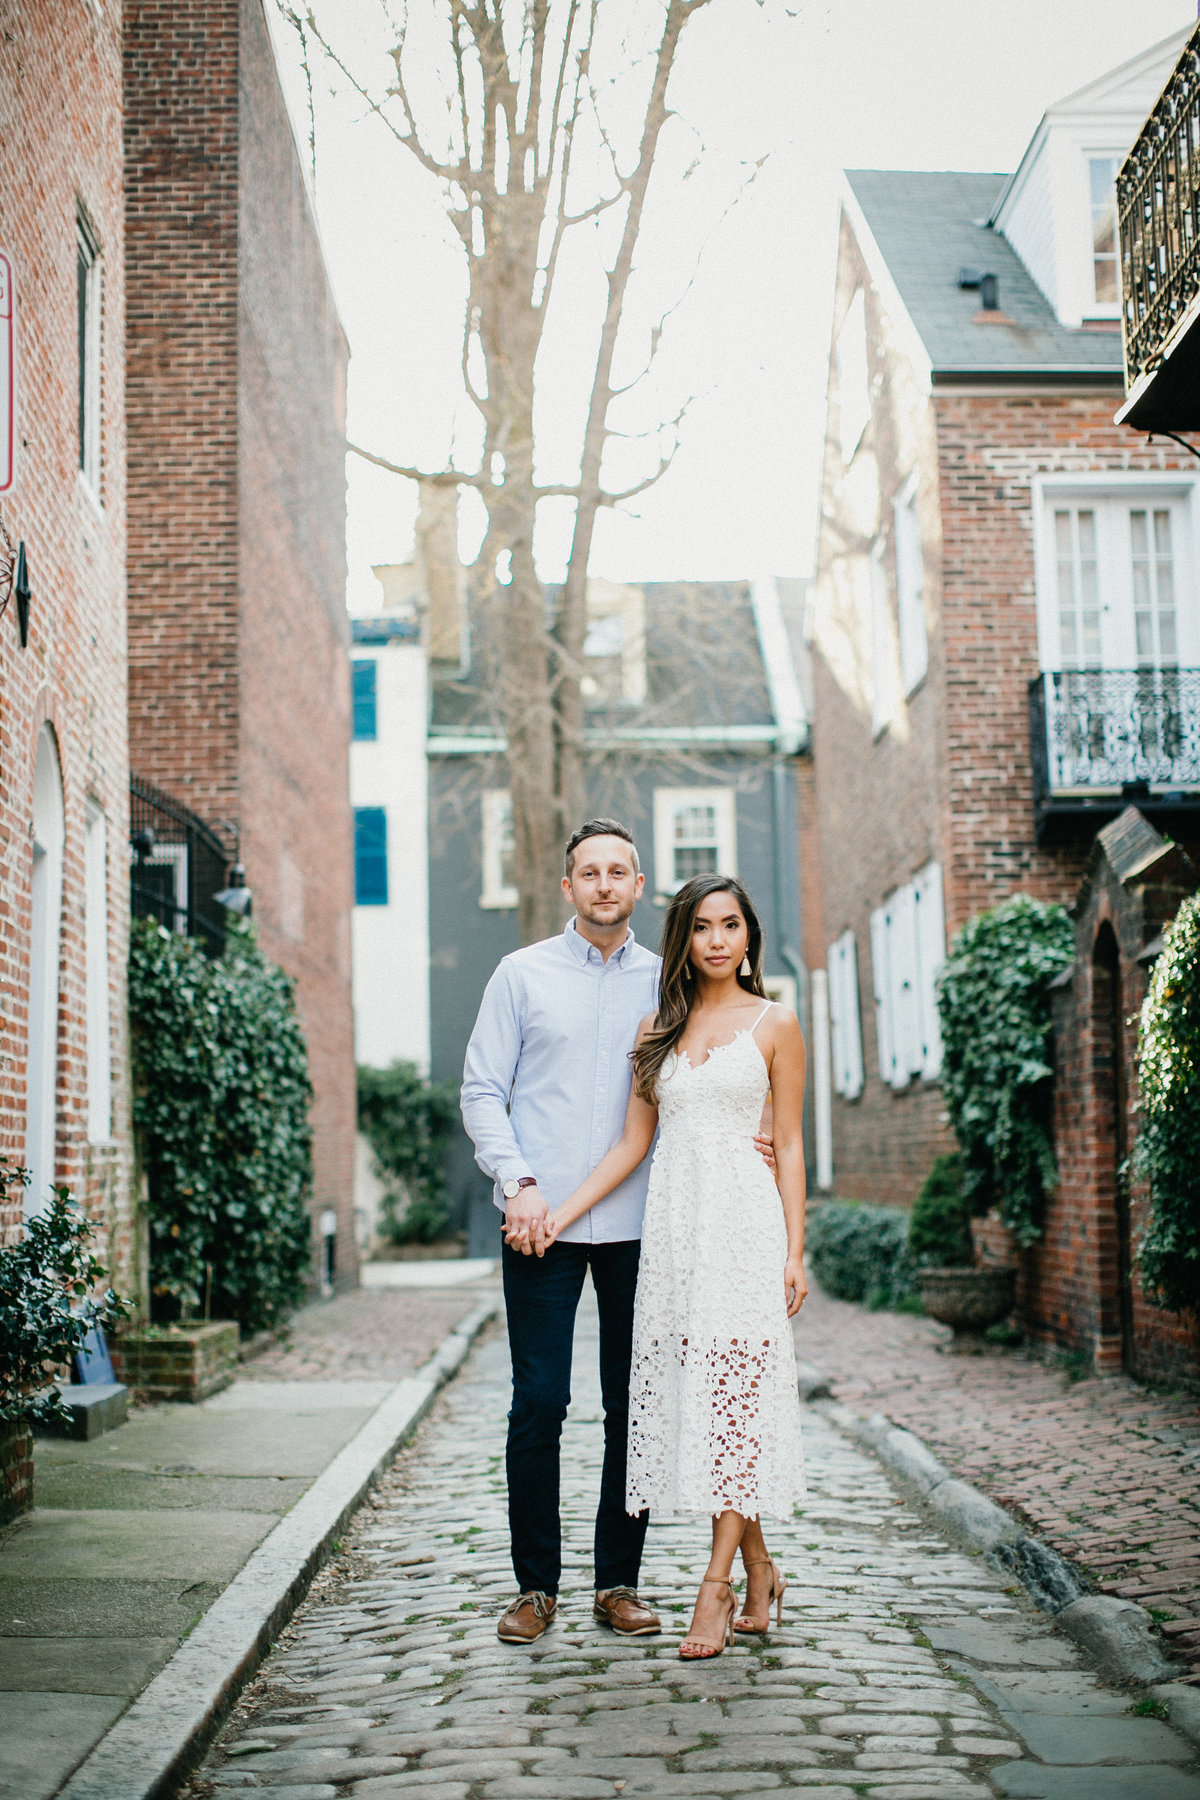 Old City engagement session, photographed by Sweetwater Portraits.